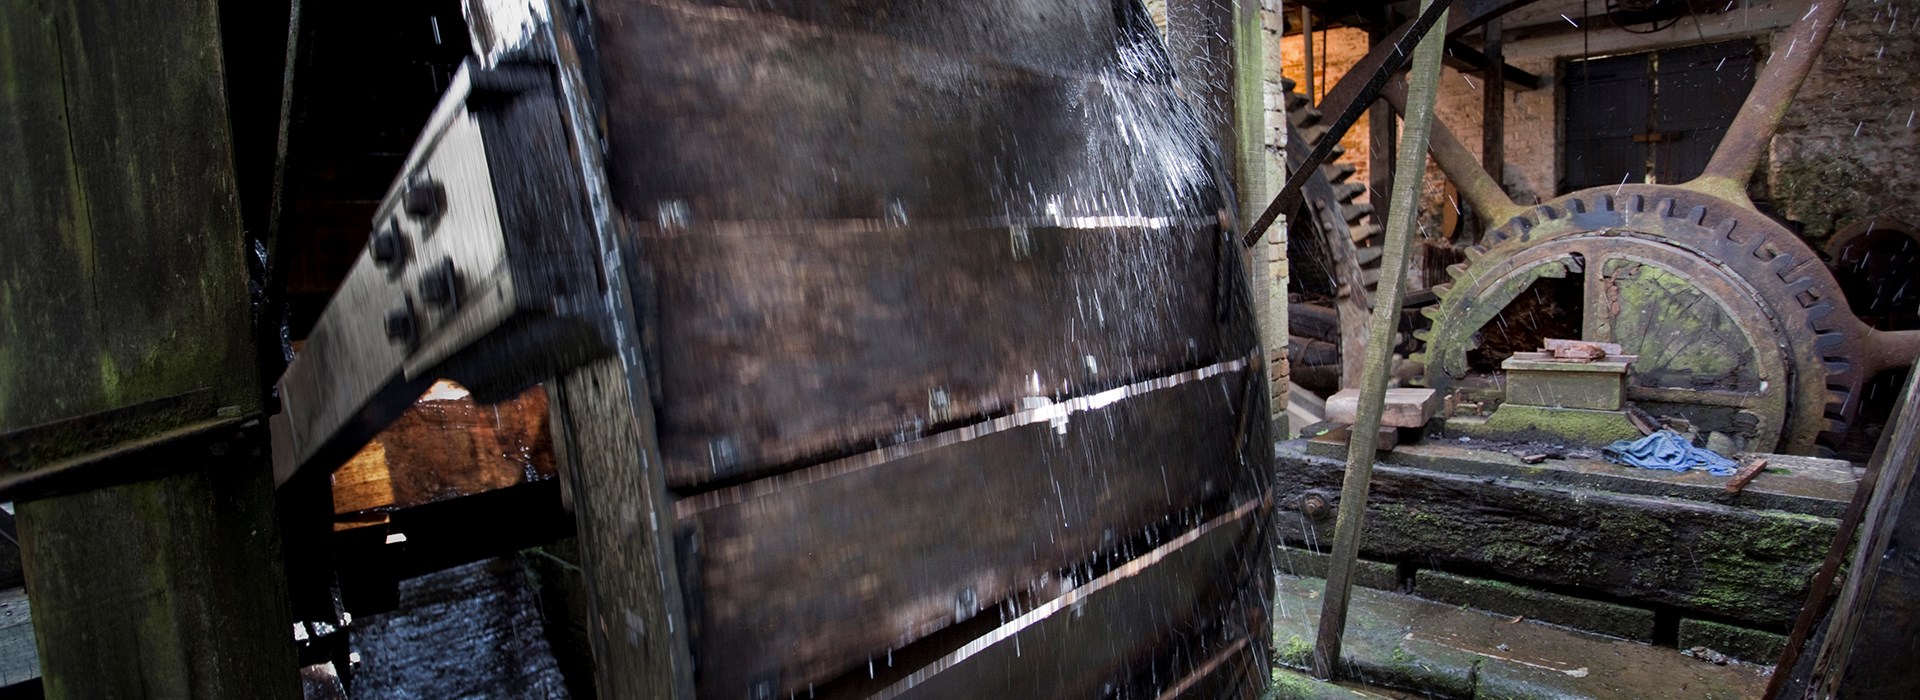 Detail of a water powered wheel with toothed flywheel in the background